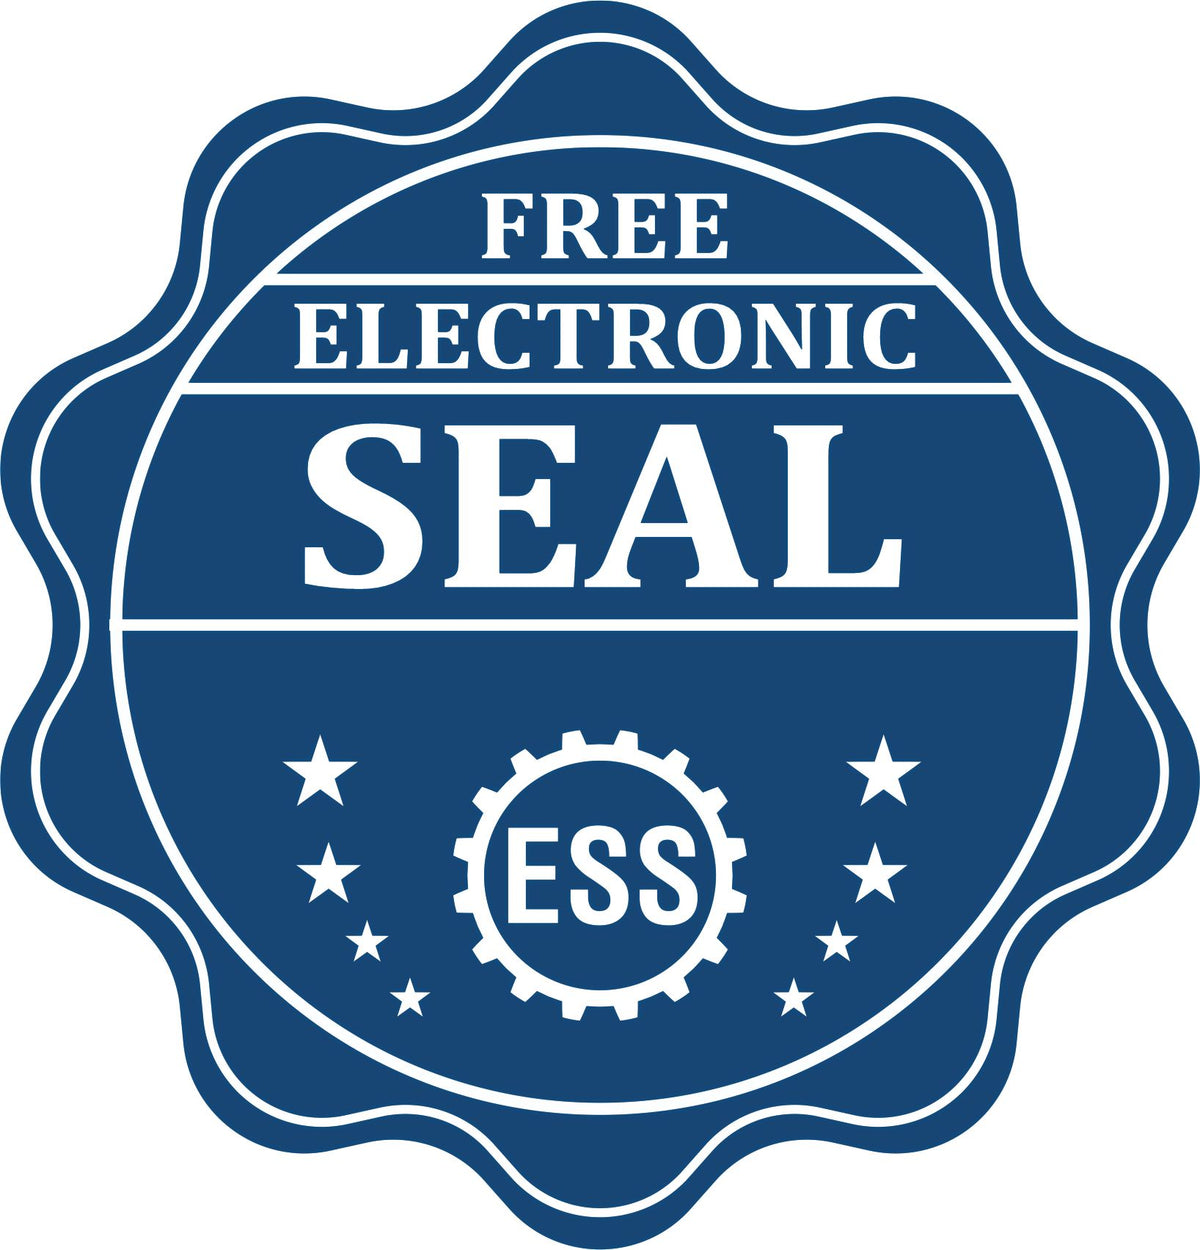 A badge showing a free electronic seal for the Self-Inking Wyoming Landscape Architect Stamp with stars and the ESS gear on the emblem.